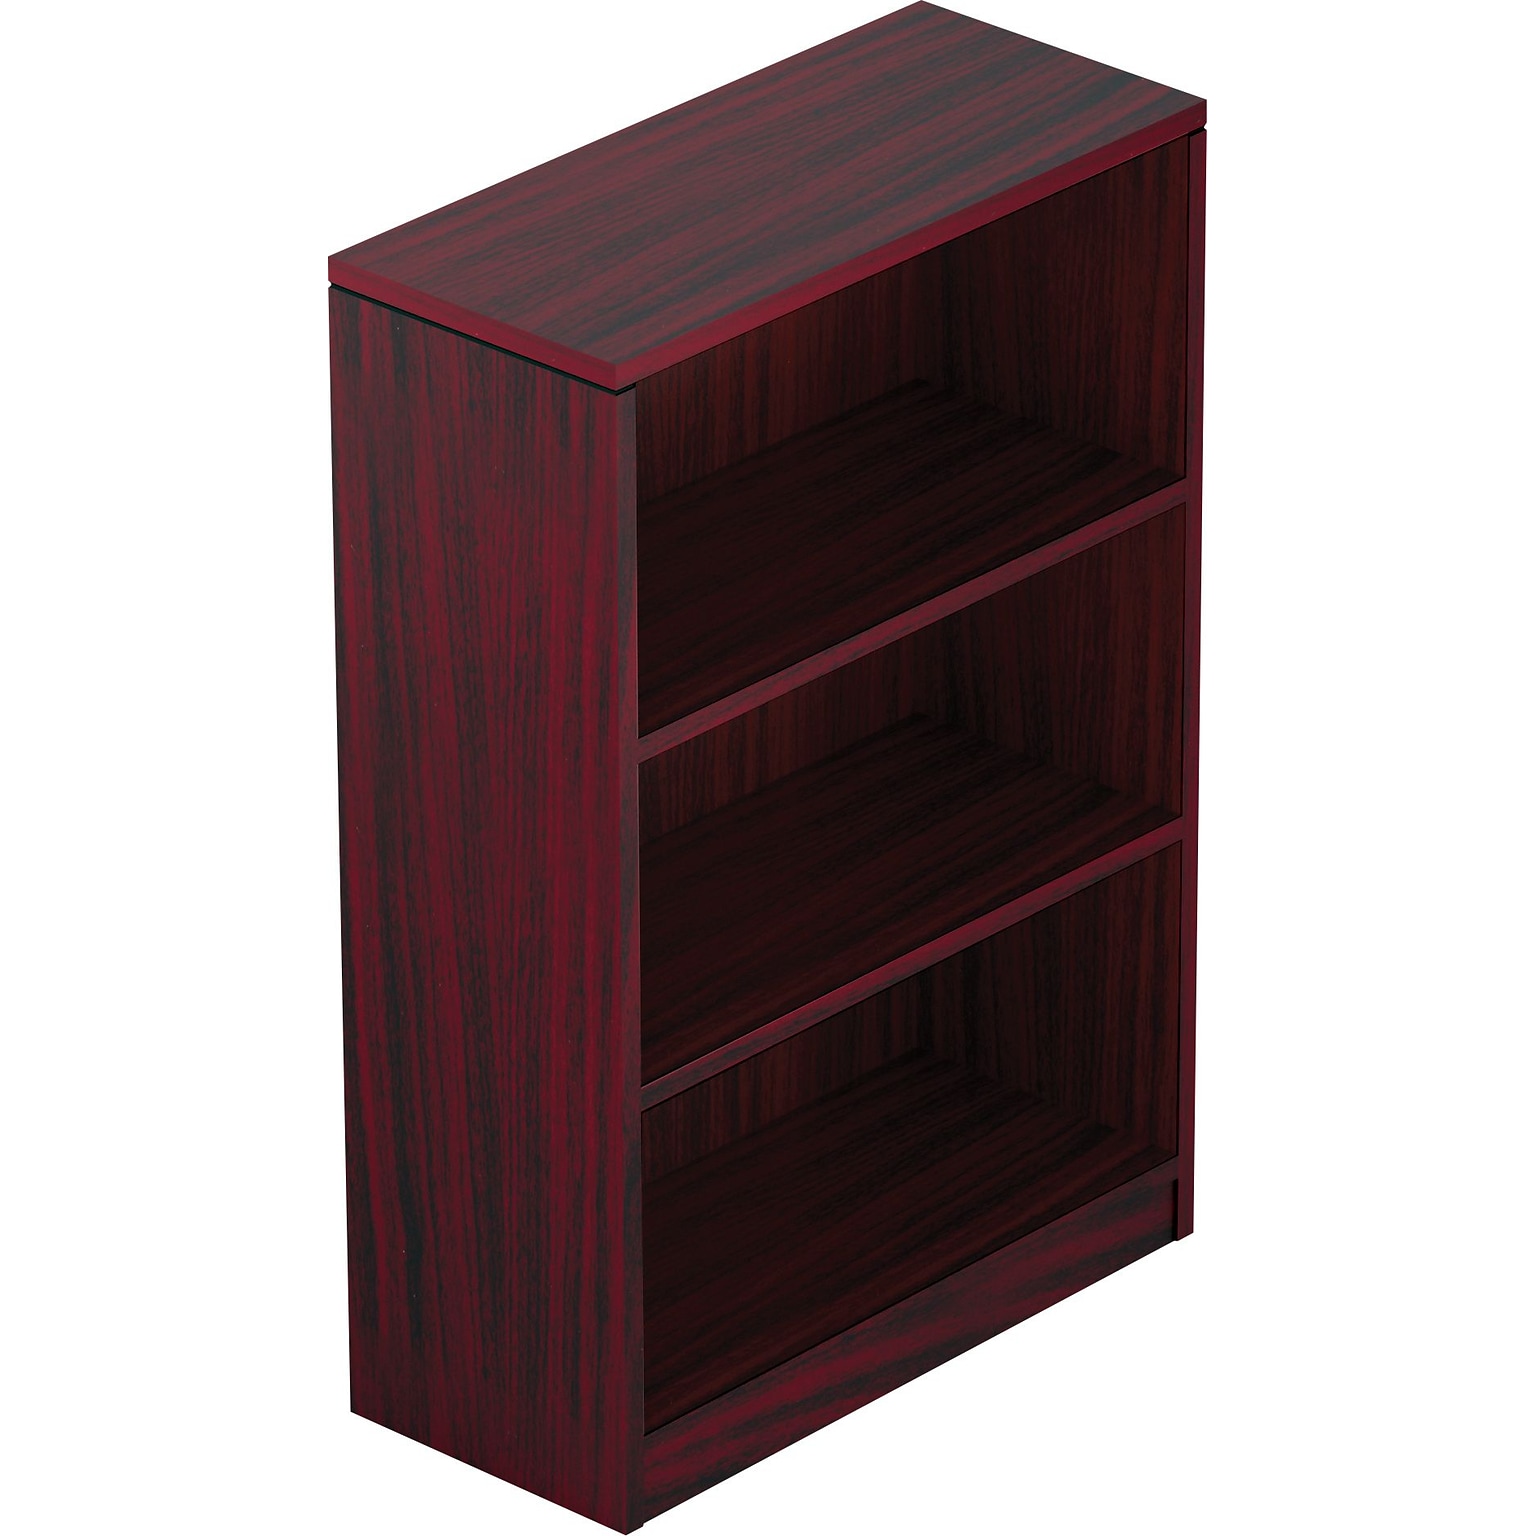 Offices to Go Superior Laminate 48H 2-Shelf Bookcase with Adjustable Shelves, American Mahogany (SL48BC-AML)